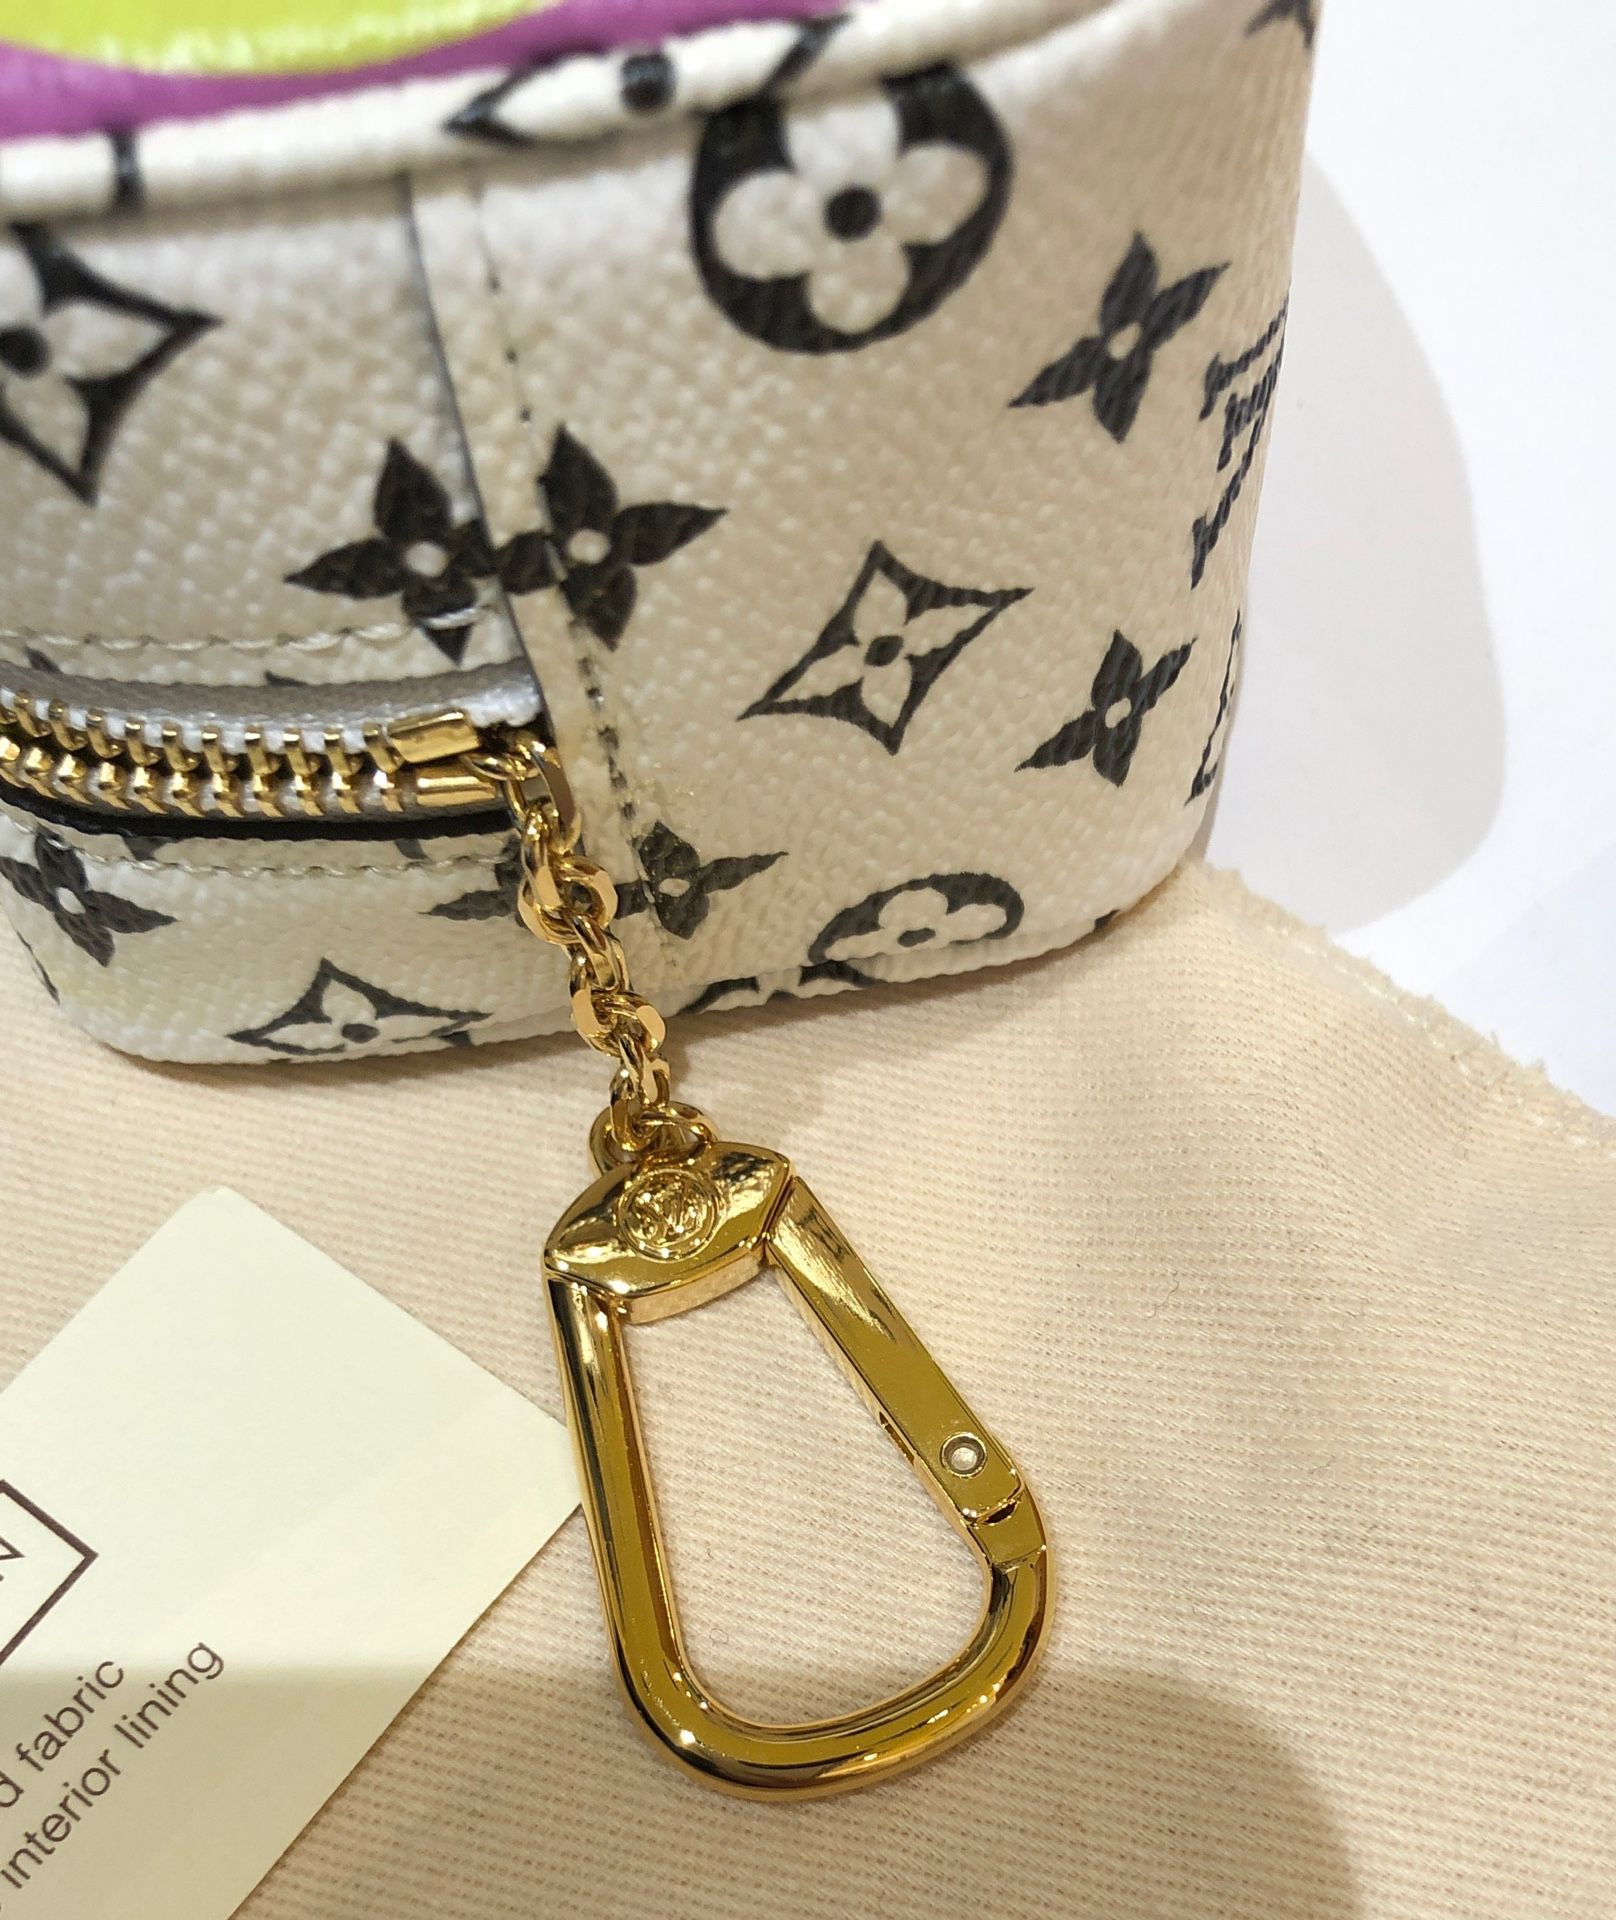 Louis Vuitton SLG Game On Cube Coin Purse, Preowned